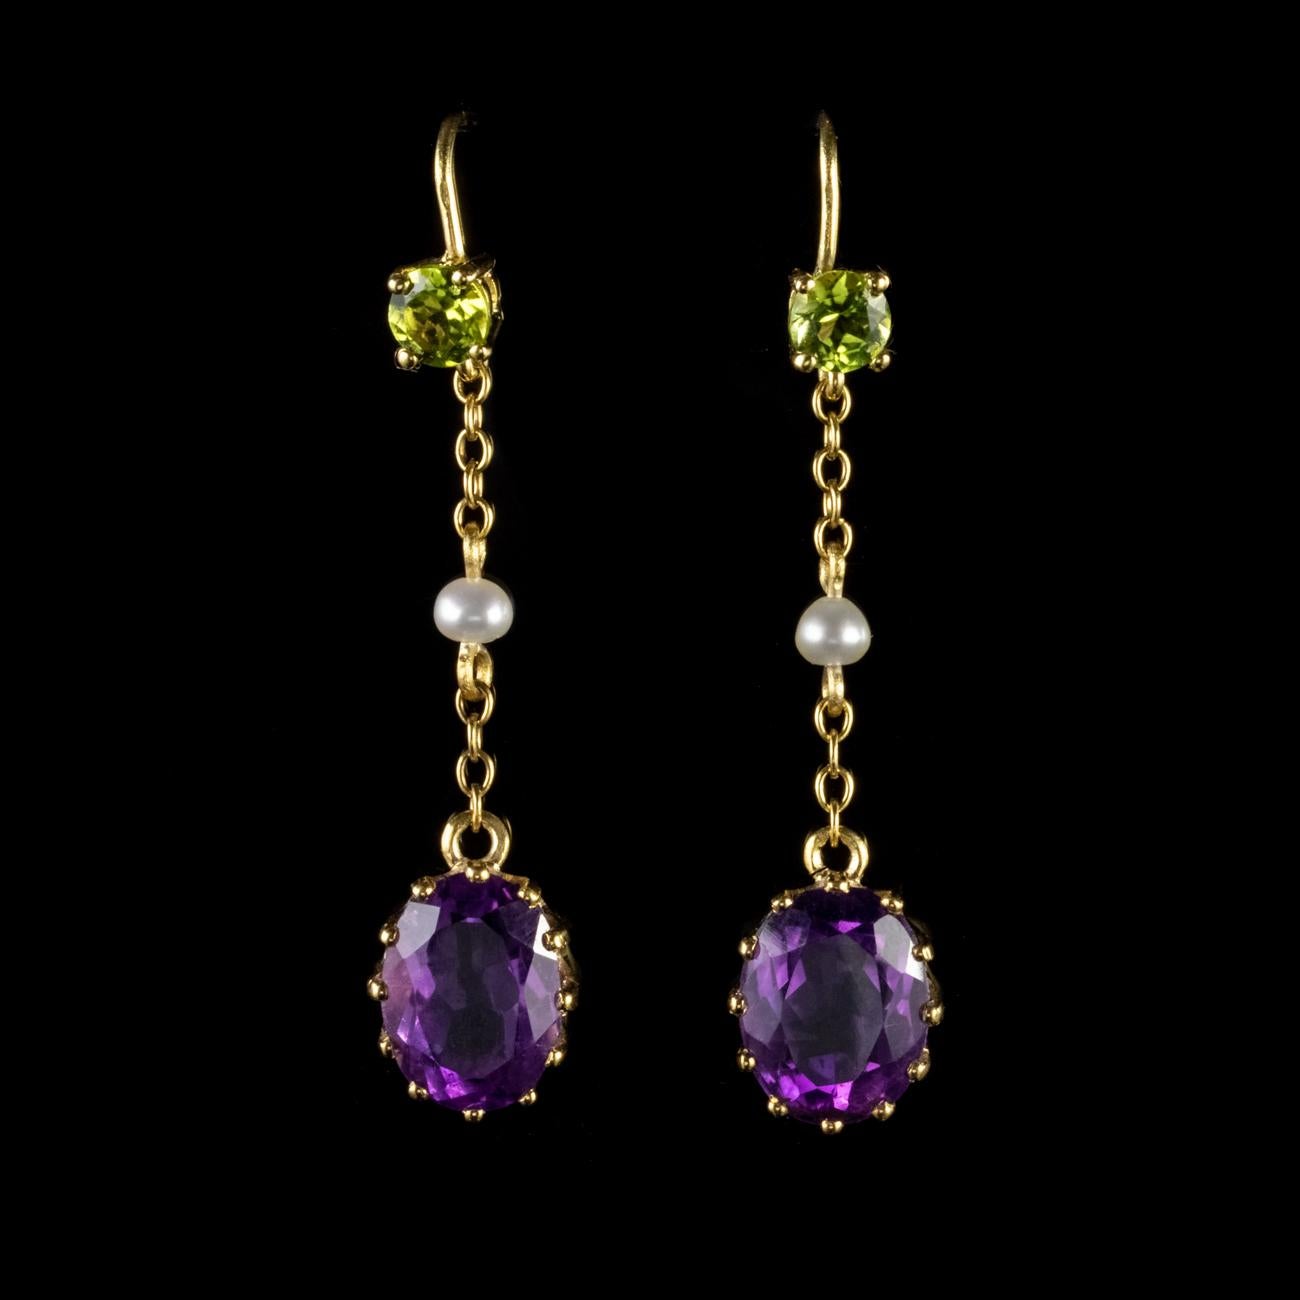 These beautiful Antique Edwardian Suffragette earrings have been modelled in 9ct Yellow Gold. Each earring features an uppermost 0.30ct Peridot which leads down to a Pearl set in the middle of a delicate chain. Finally the chain leads down to a